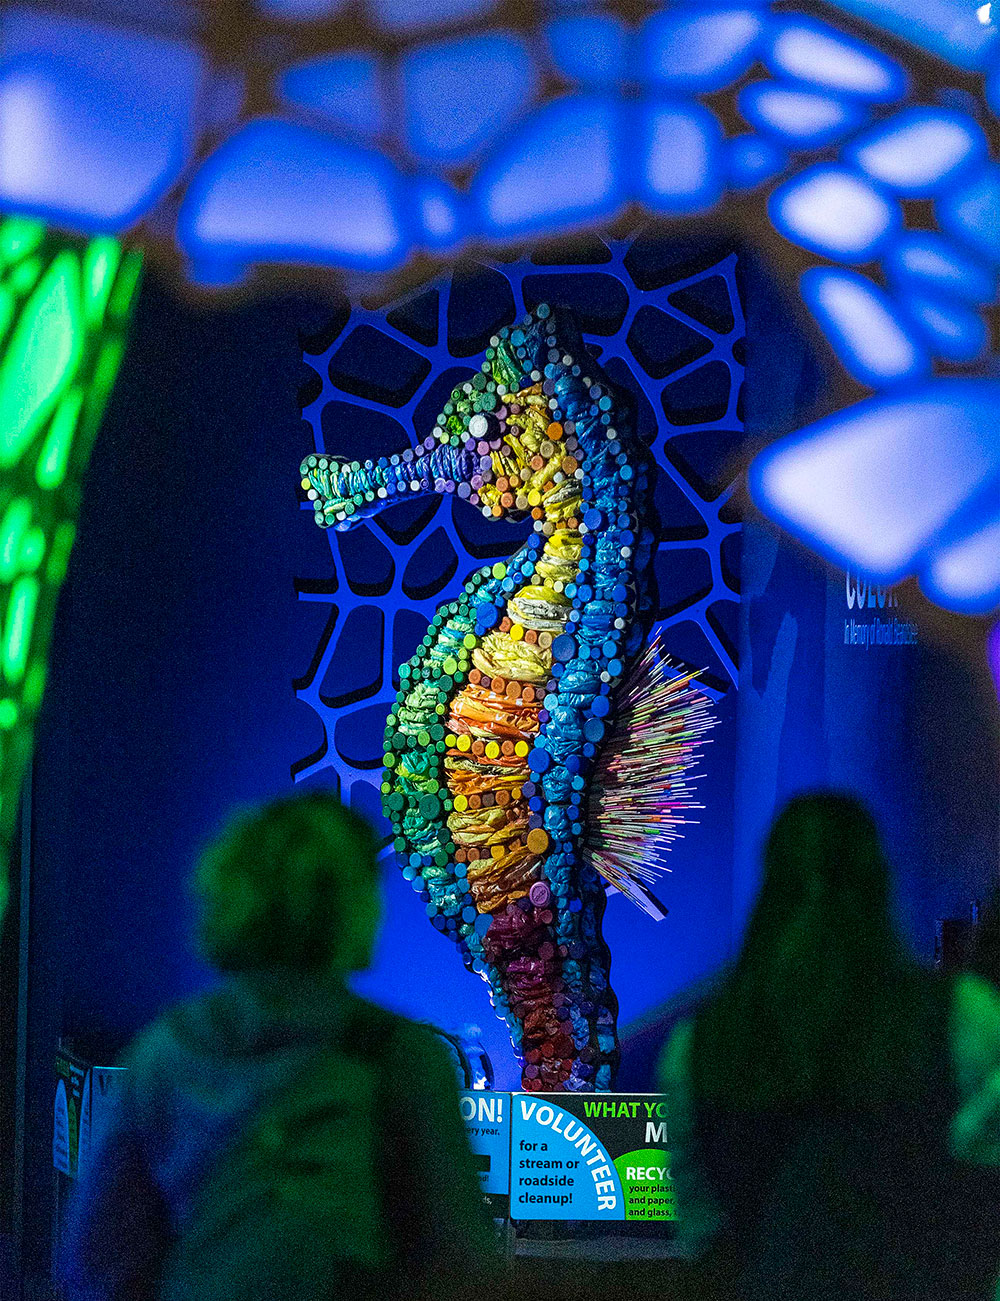 The Greensboro Science Center’s seahorse sculpture calls attention to the more than 14 million tons of plastic that enter our oceans every year.